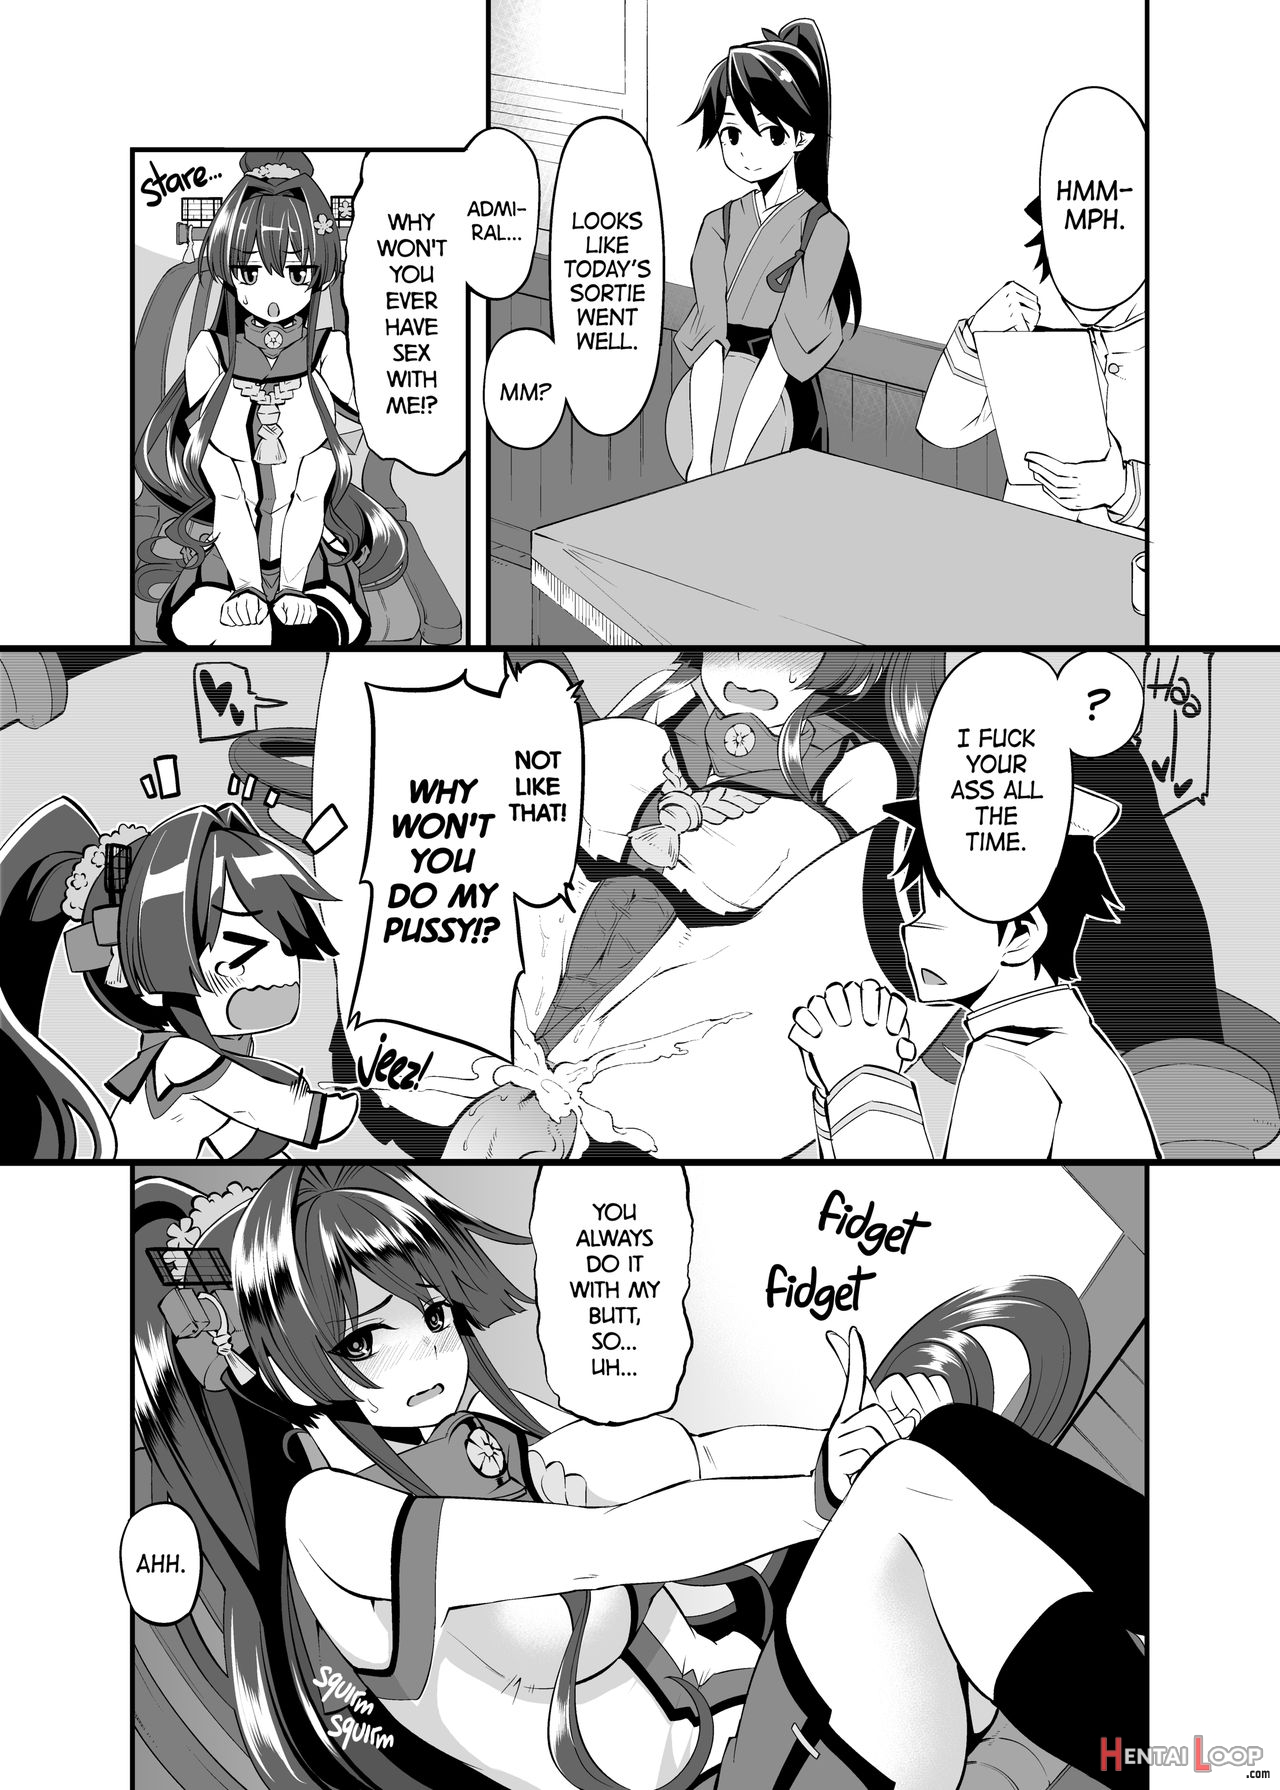 Onahole Yamato Reporting For Duty page 6